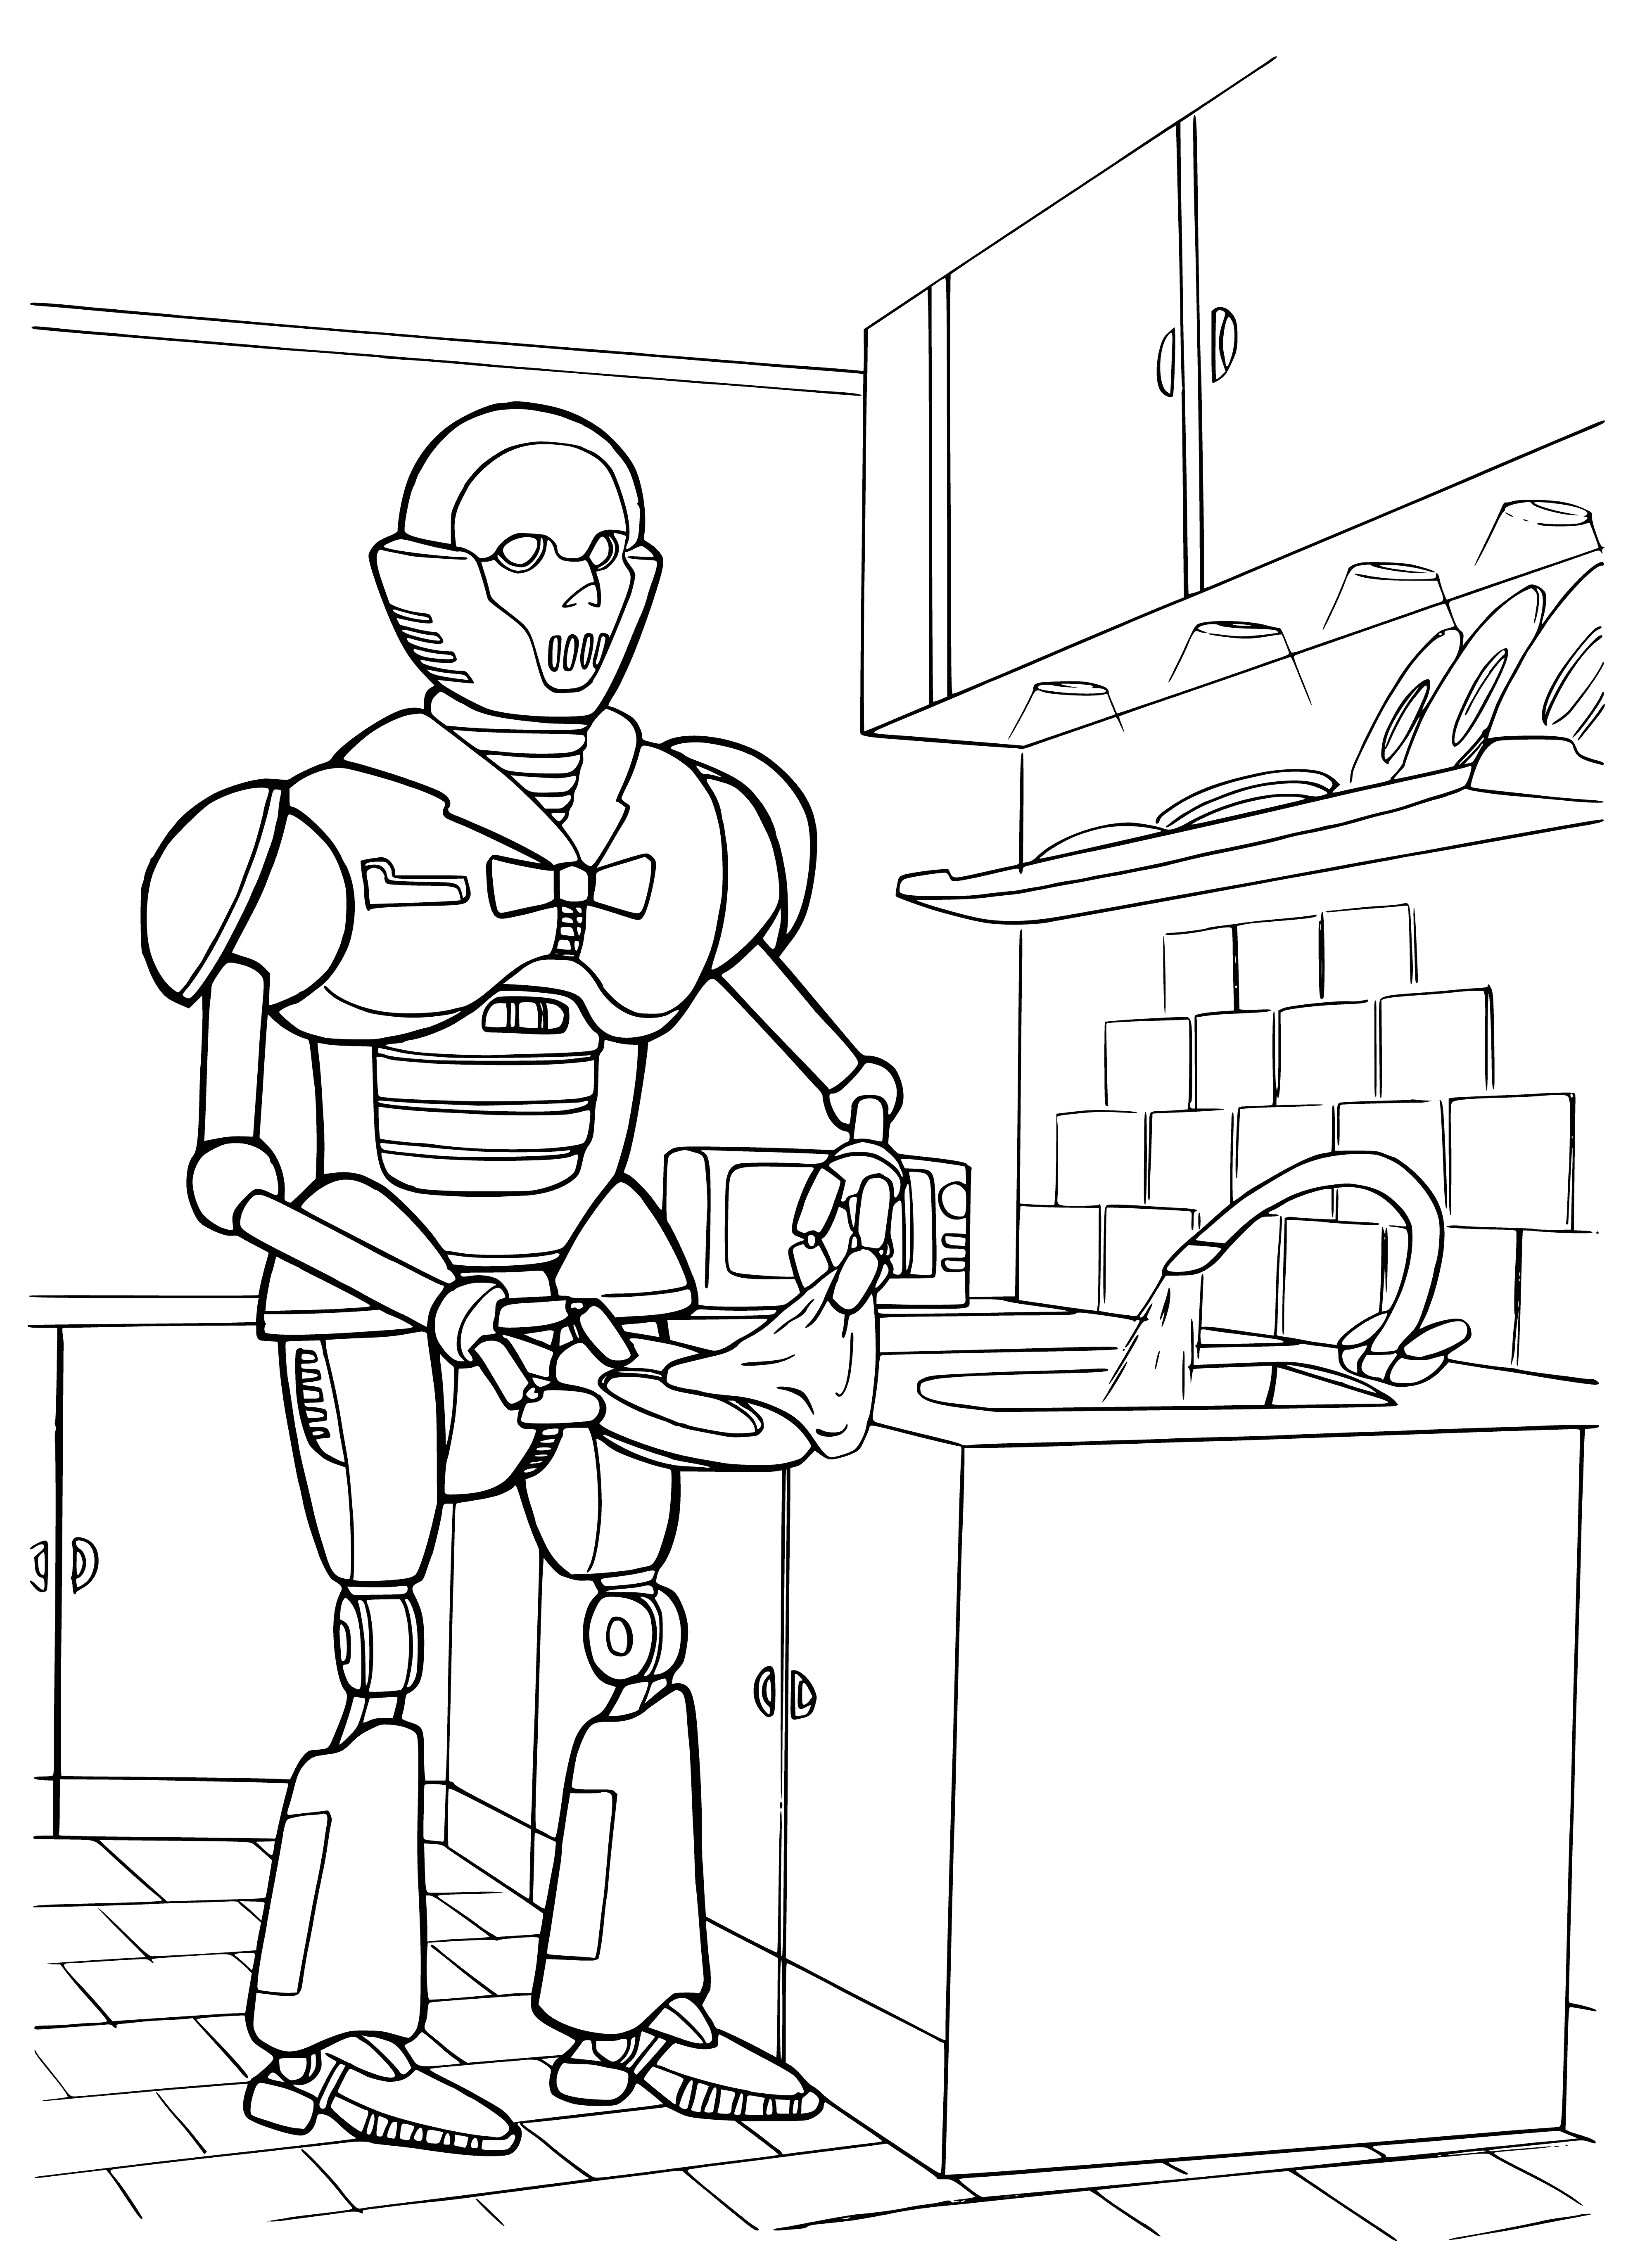 coloring page: Smart dishwasher can operate remotely using sensors & scrubbing arm, cleaning dishes w/out humans needed. #Robotics #SmartHome